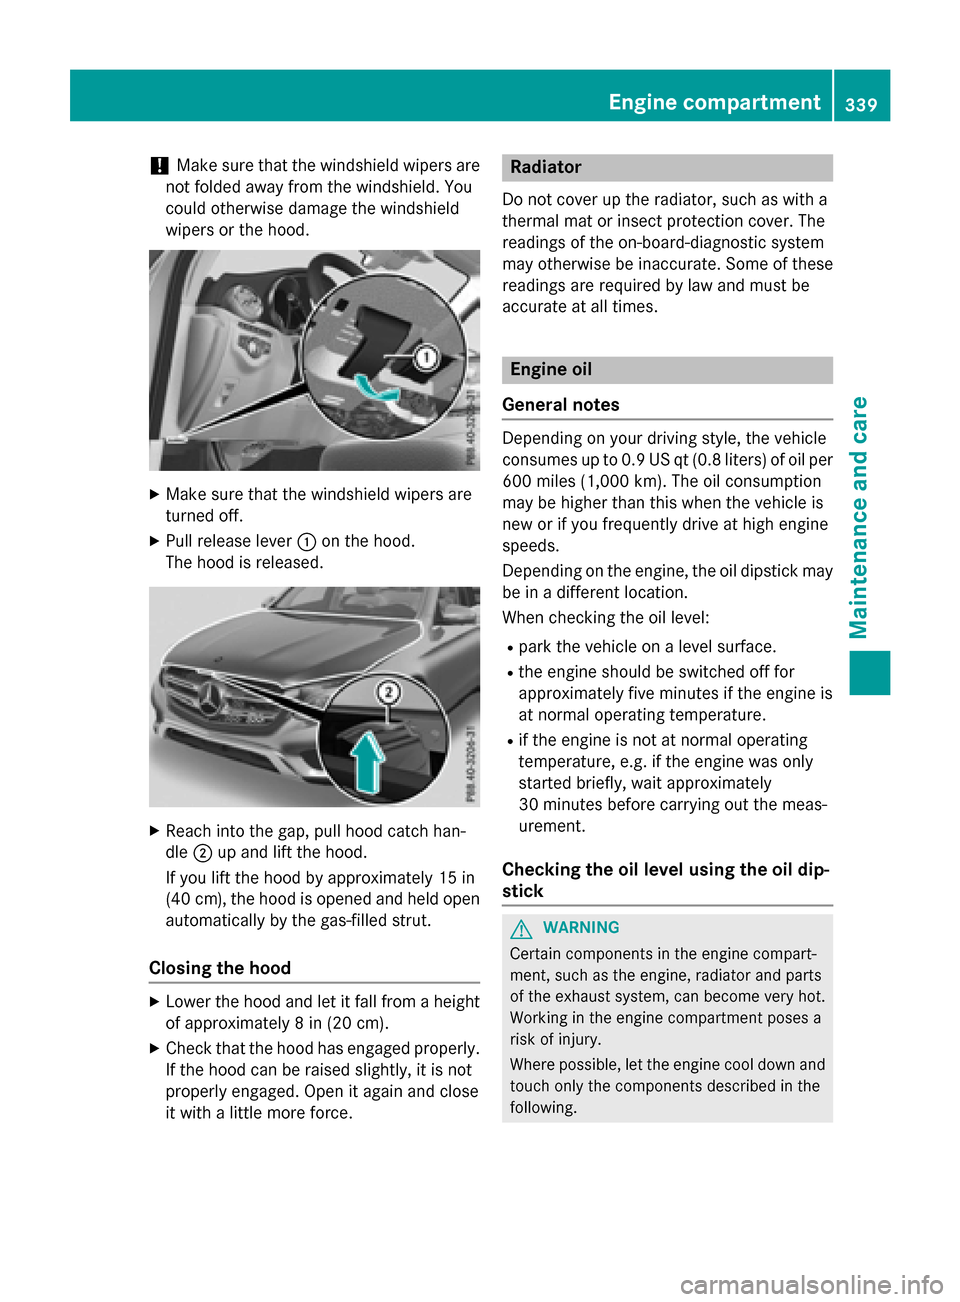 MERCEDES-BENZ GLC-Class 2016 X253 User Guide !Make sure that the windshield wipers are
not folded away from the windshield. You
could otherwise damage the windshield
wipers or the hood.
XMake sure that the windshield wipers are
turned off.
XPull